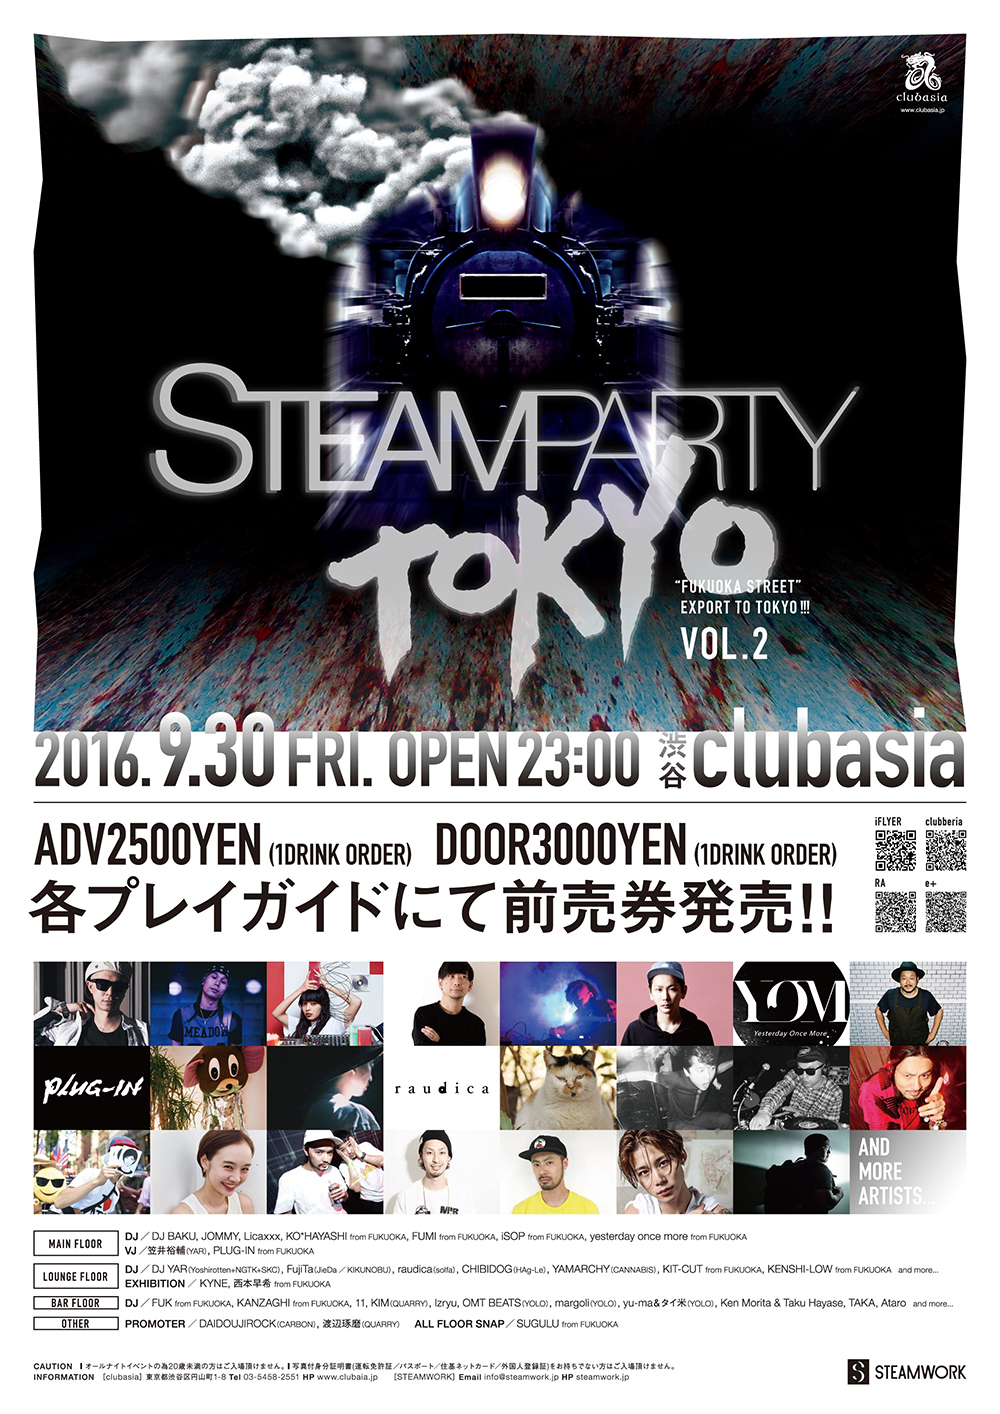 steamparty